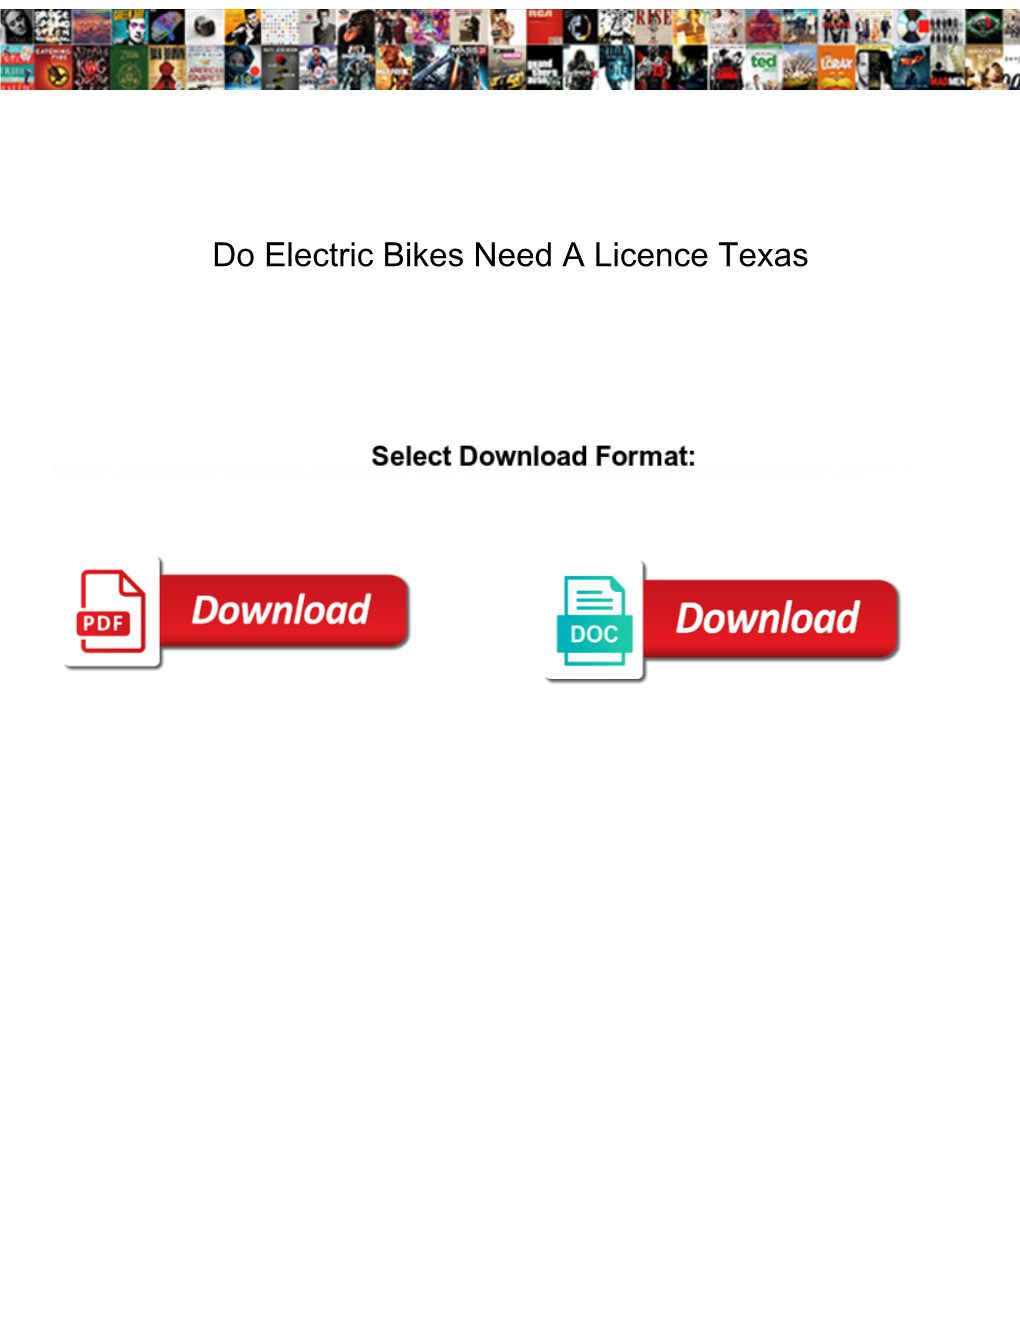 Do Electric Bikes Need a Licence Texas